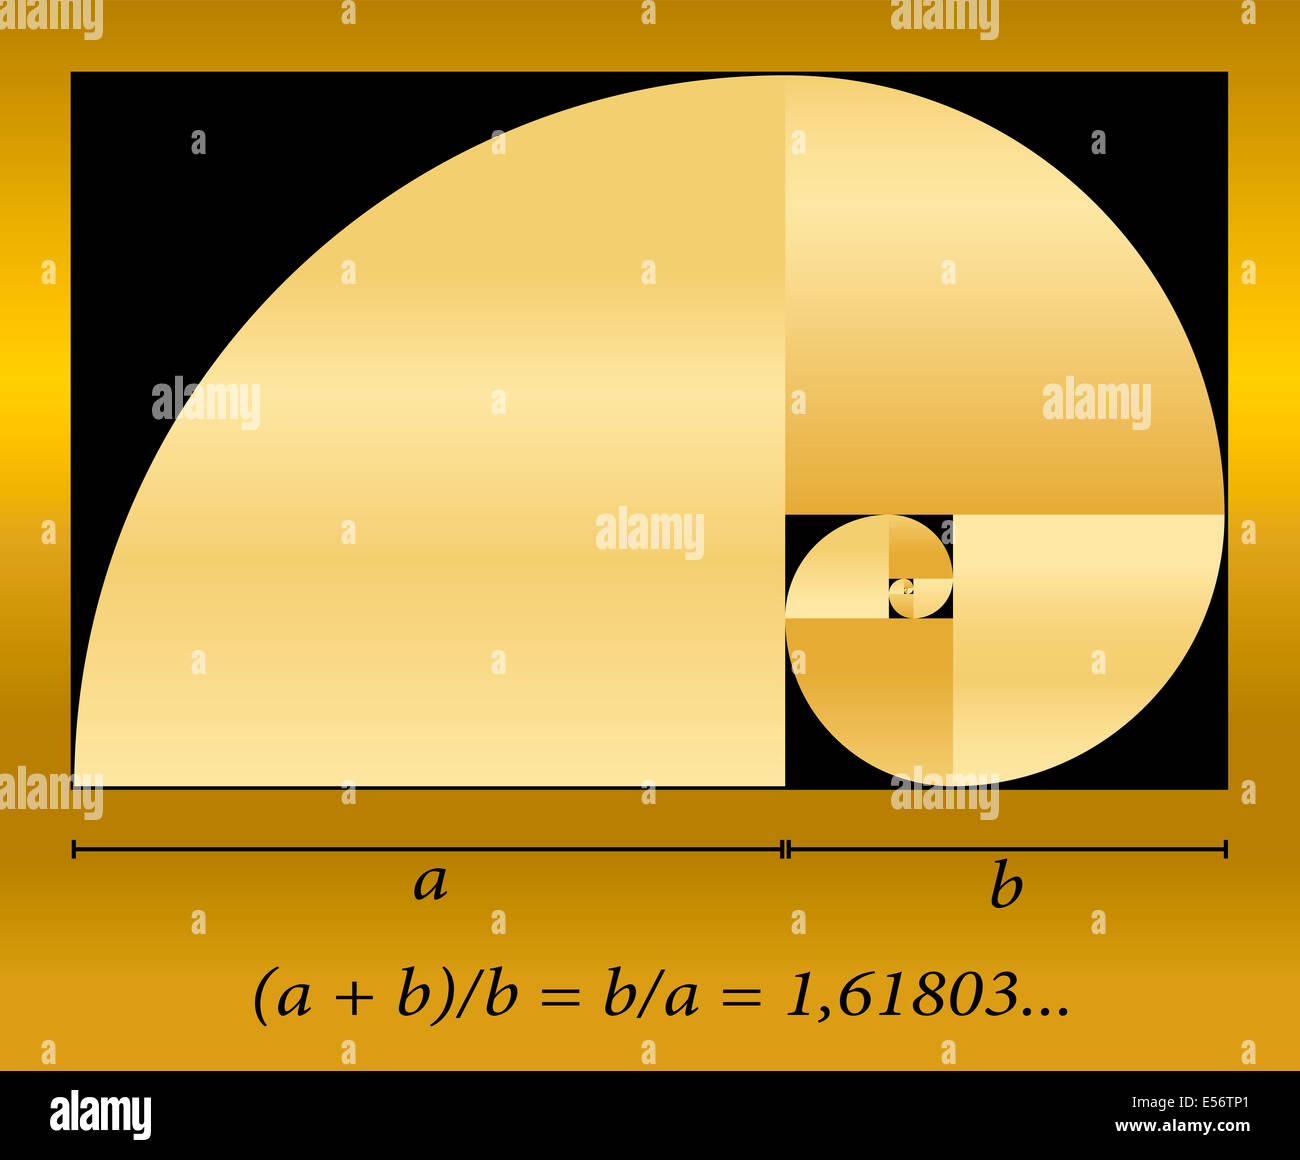 Golden cut, shown as a spiral out of quadrants, plus formula. Stock Photo